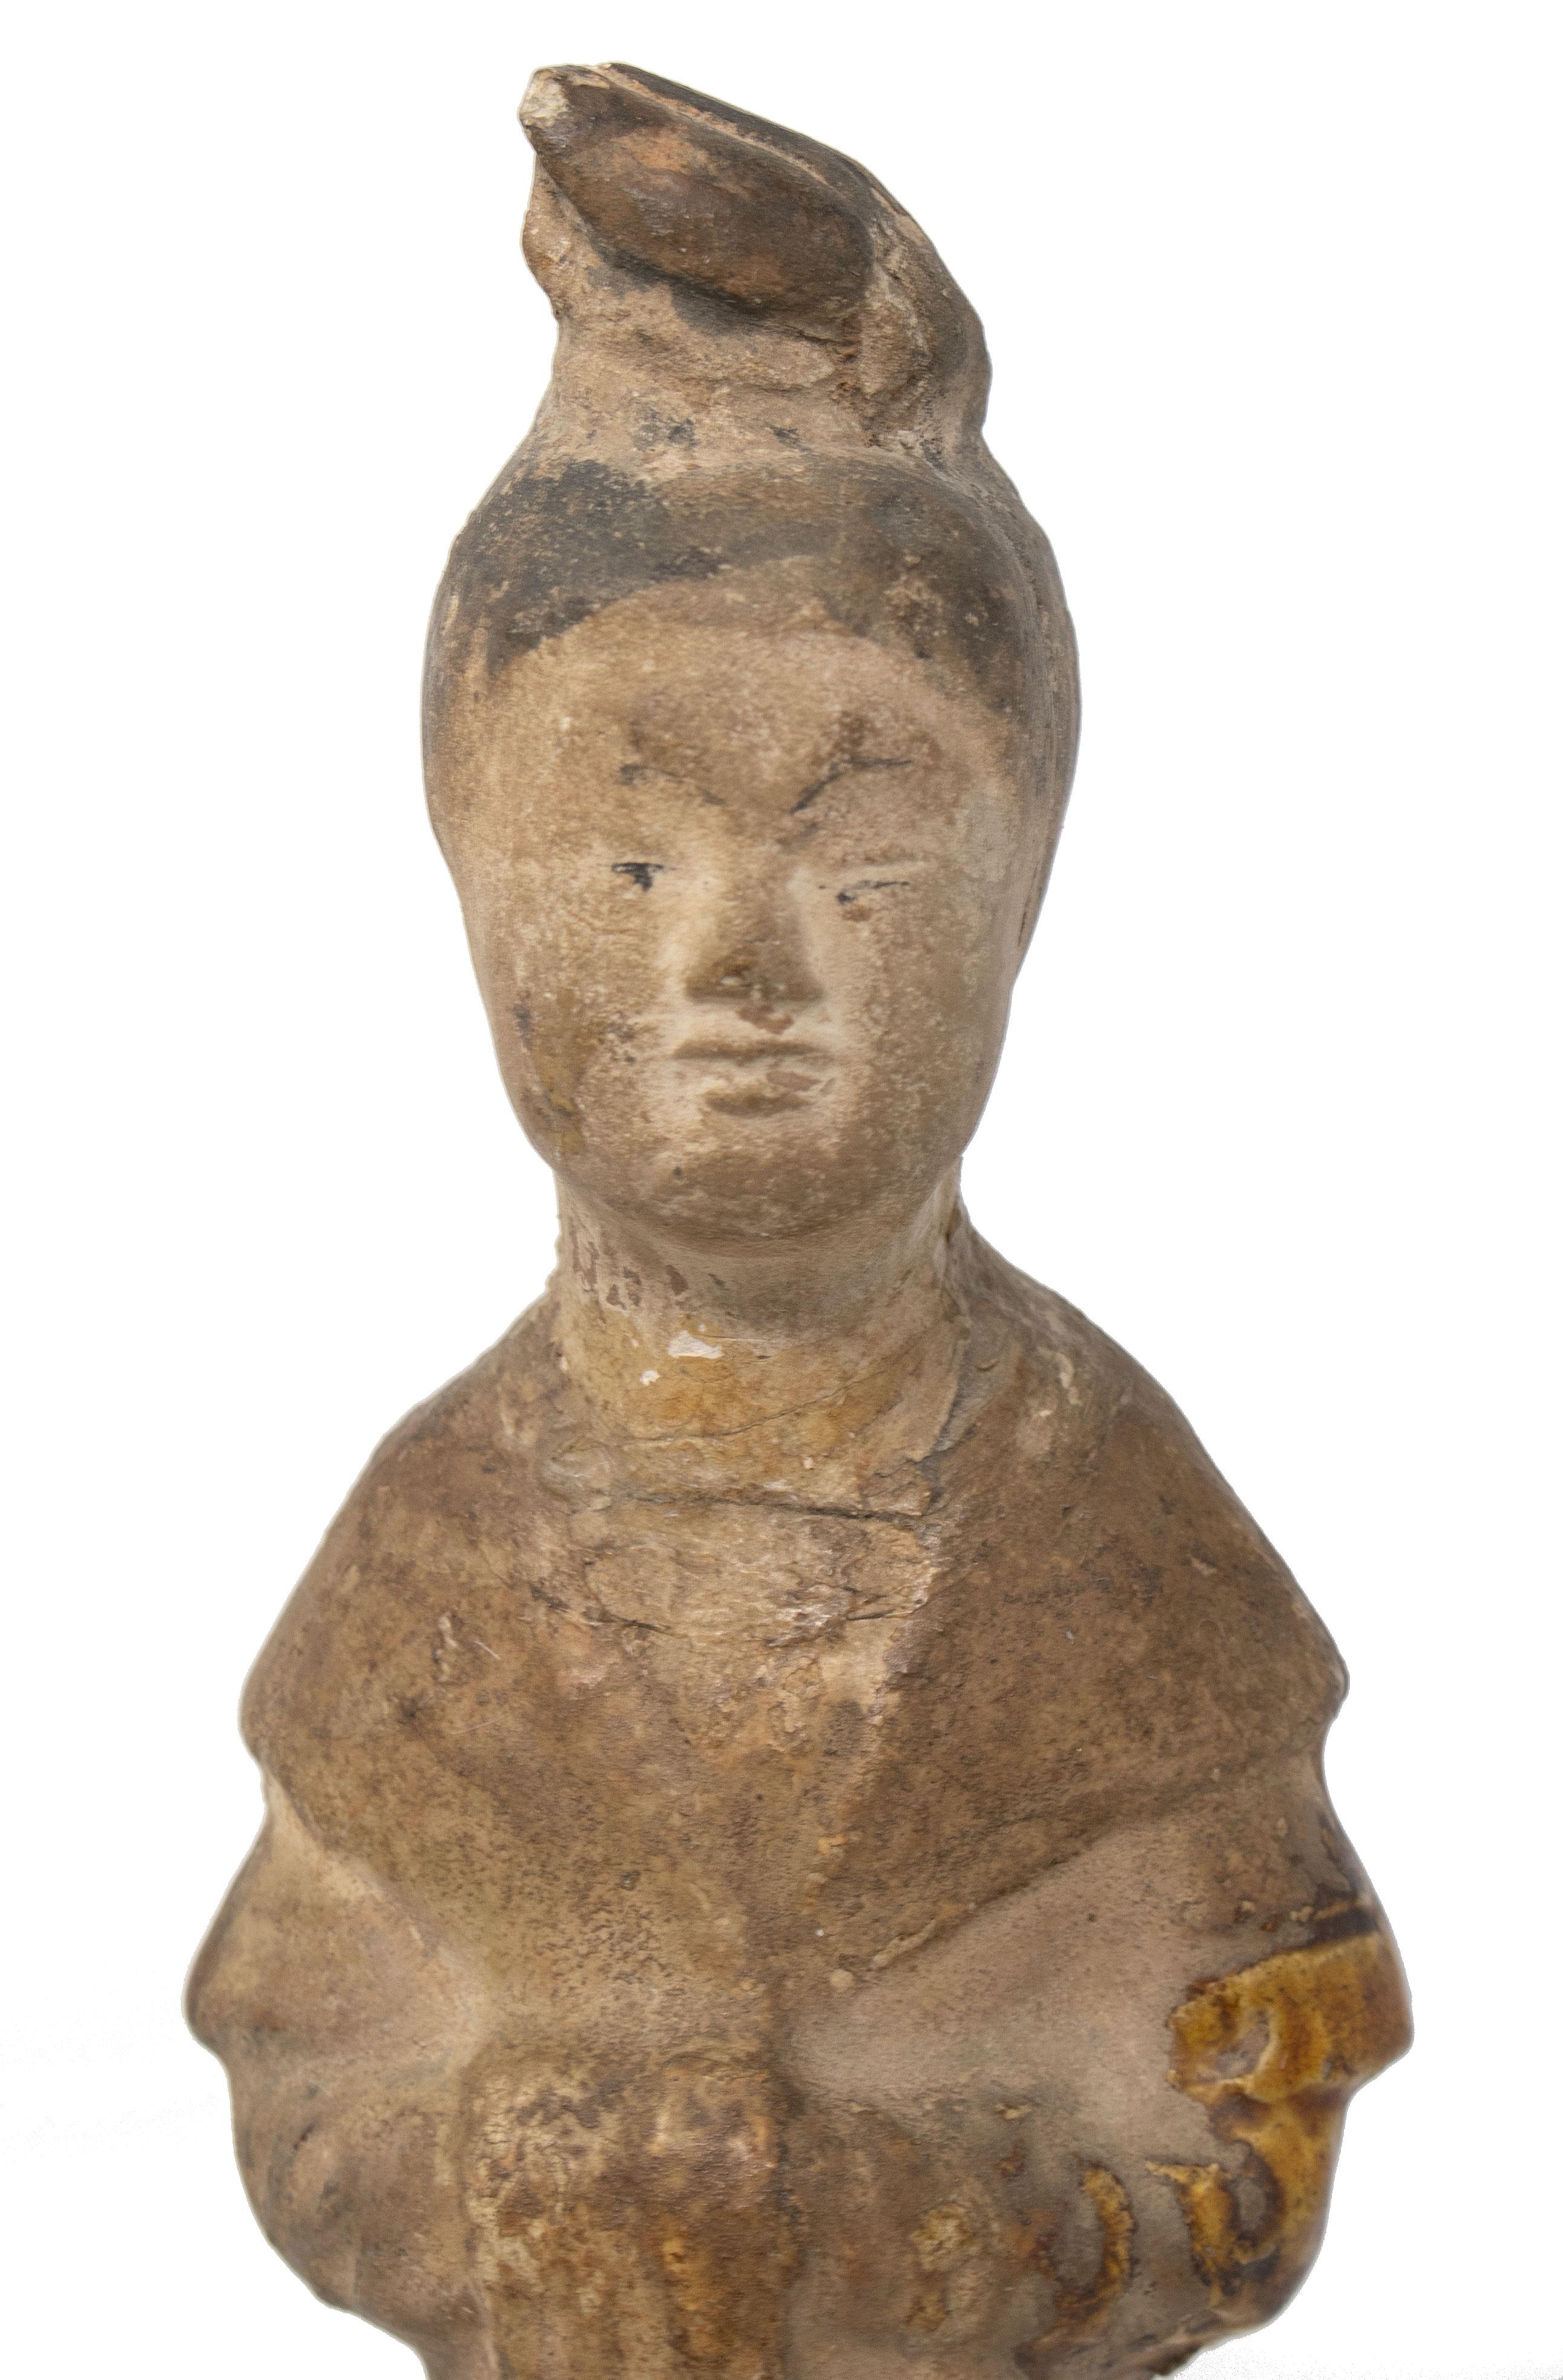 16th Century Chinese Terracotta Ceramic Figure of a Woman in Traditional Dress 2